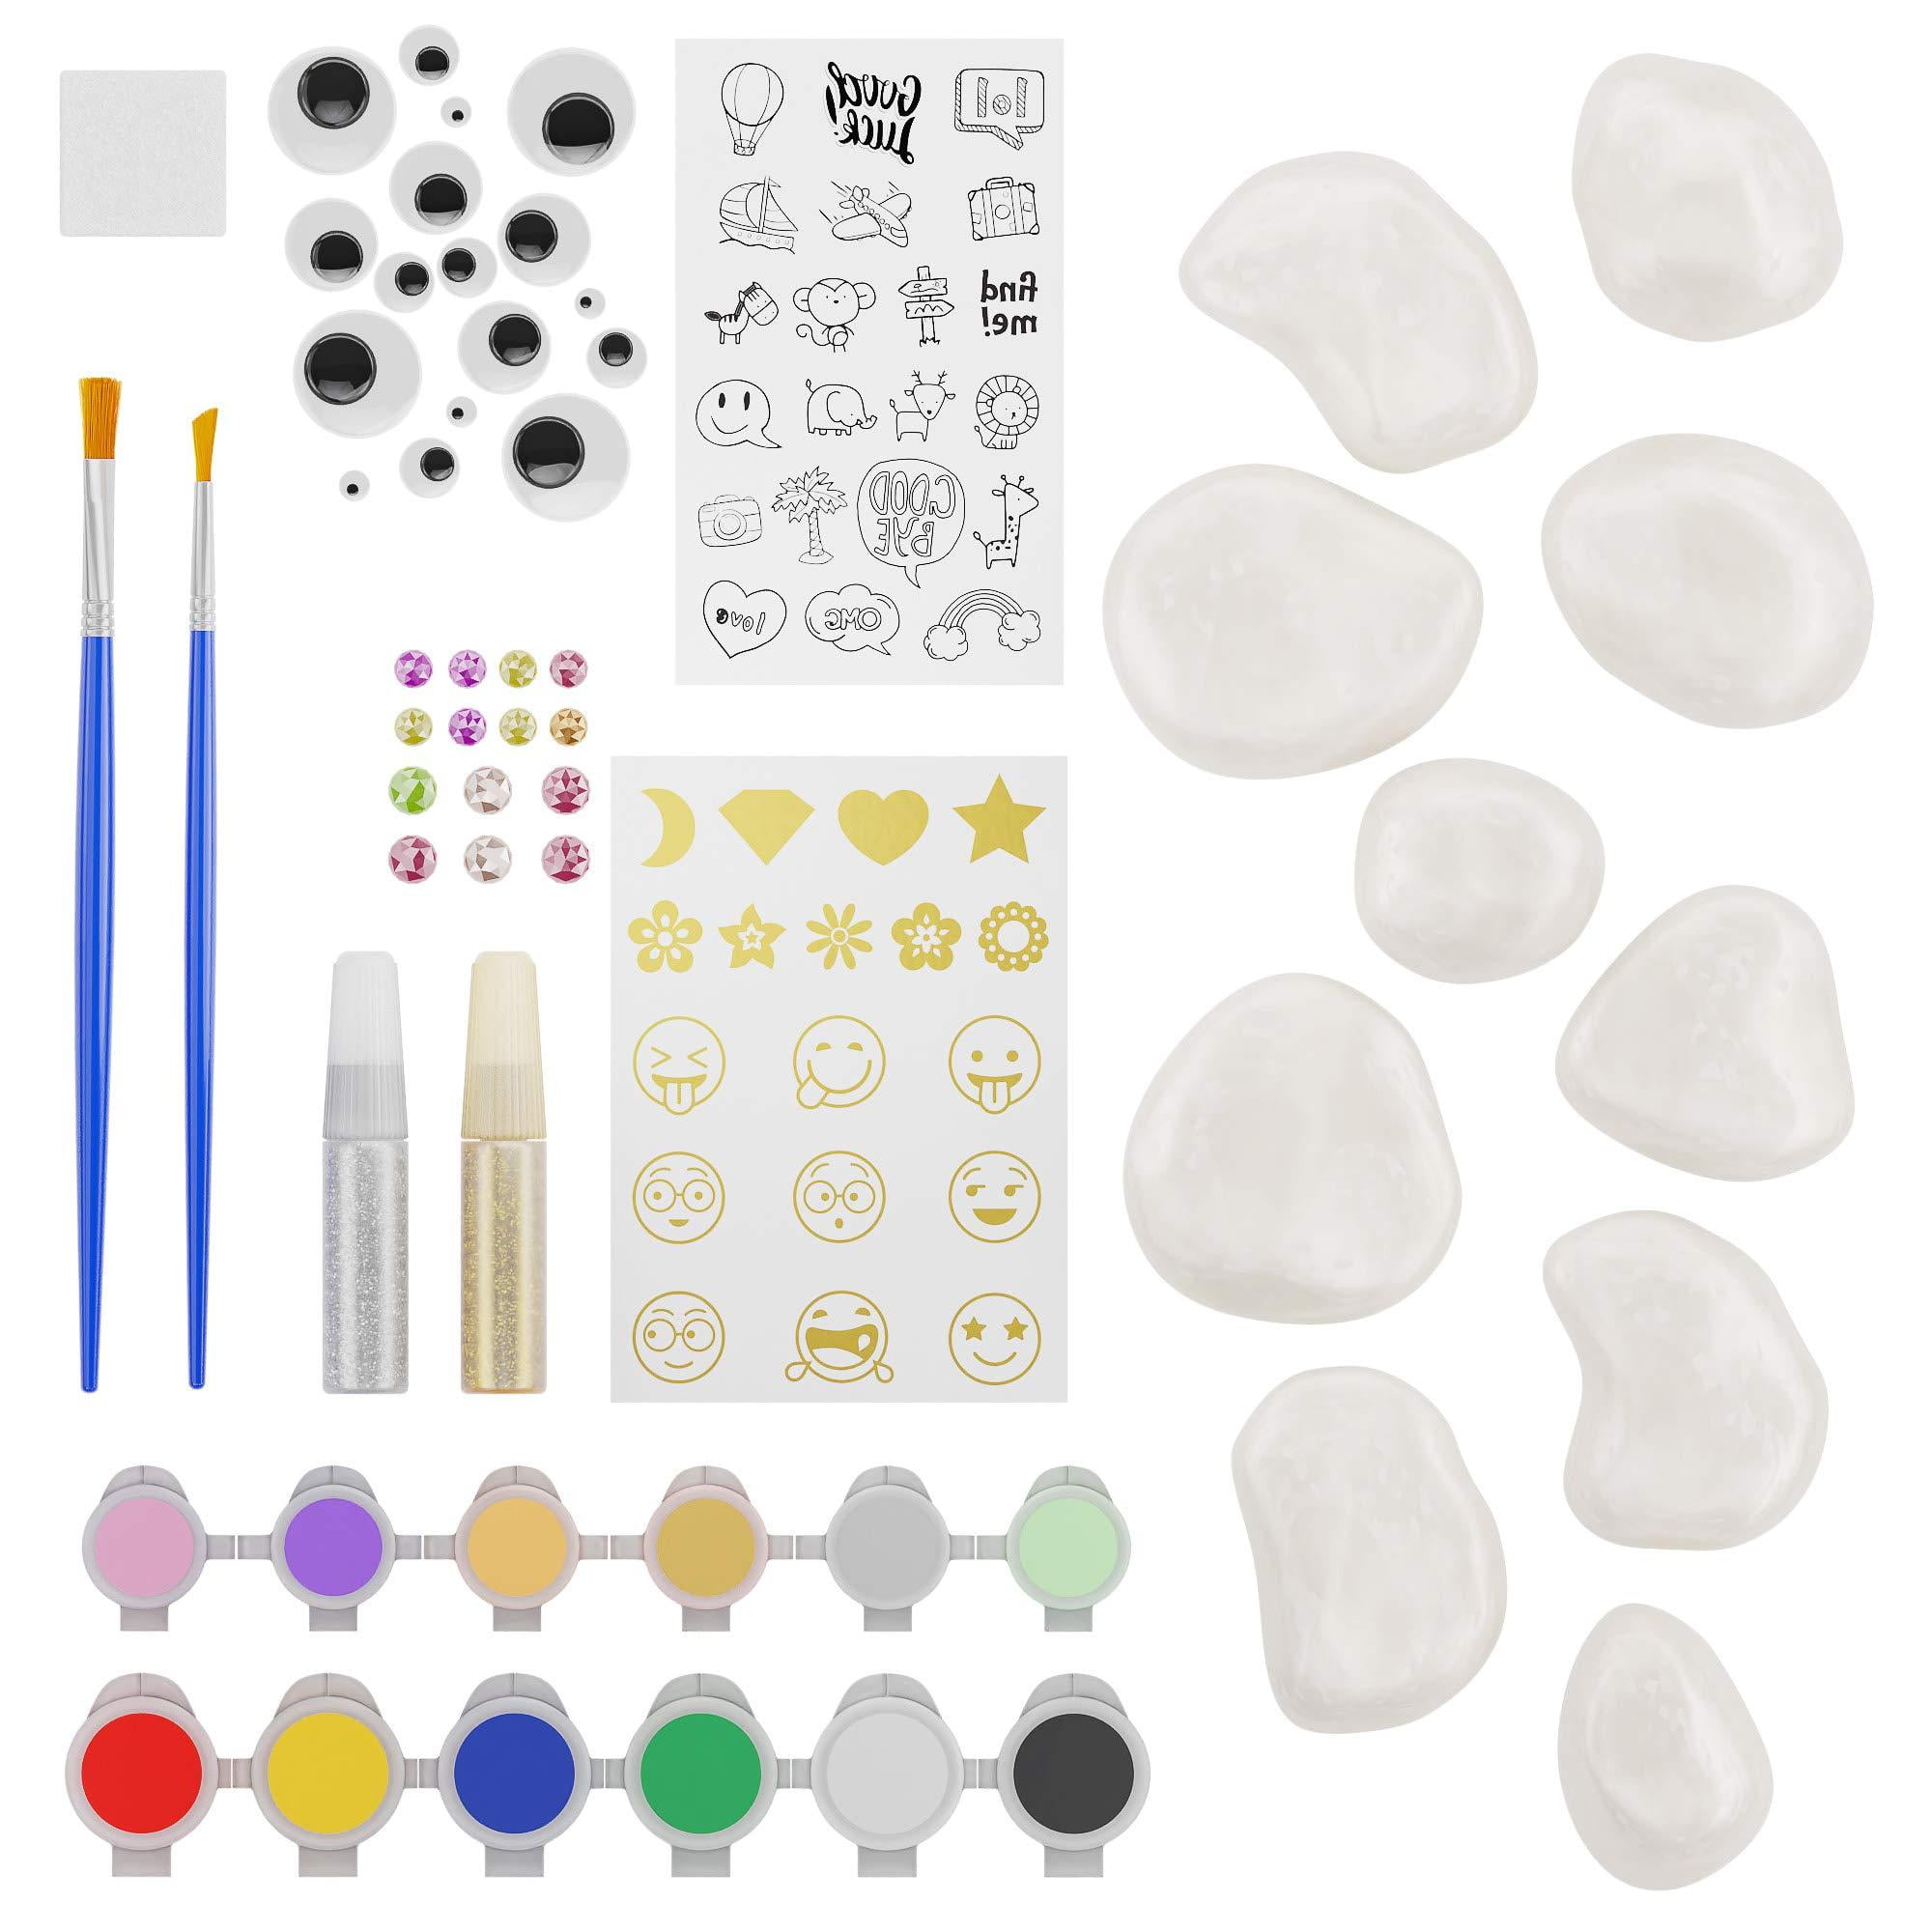 Art Kit for Painting Rock Hide and Seek Actitivies Birthday Gift for kids Rock Painting Kit for kids Arts and Crafts for Girls & Boys Supplies for Craft Kits Creative Gift for Ages 6-12 